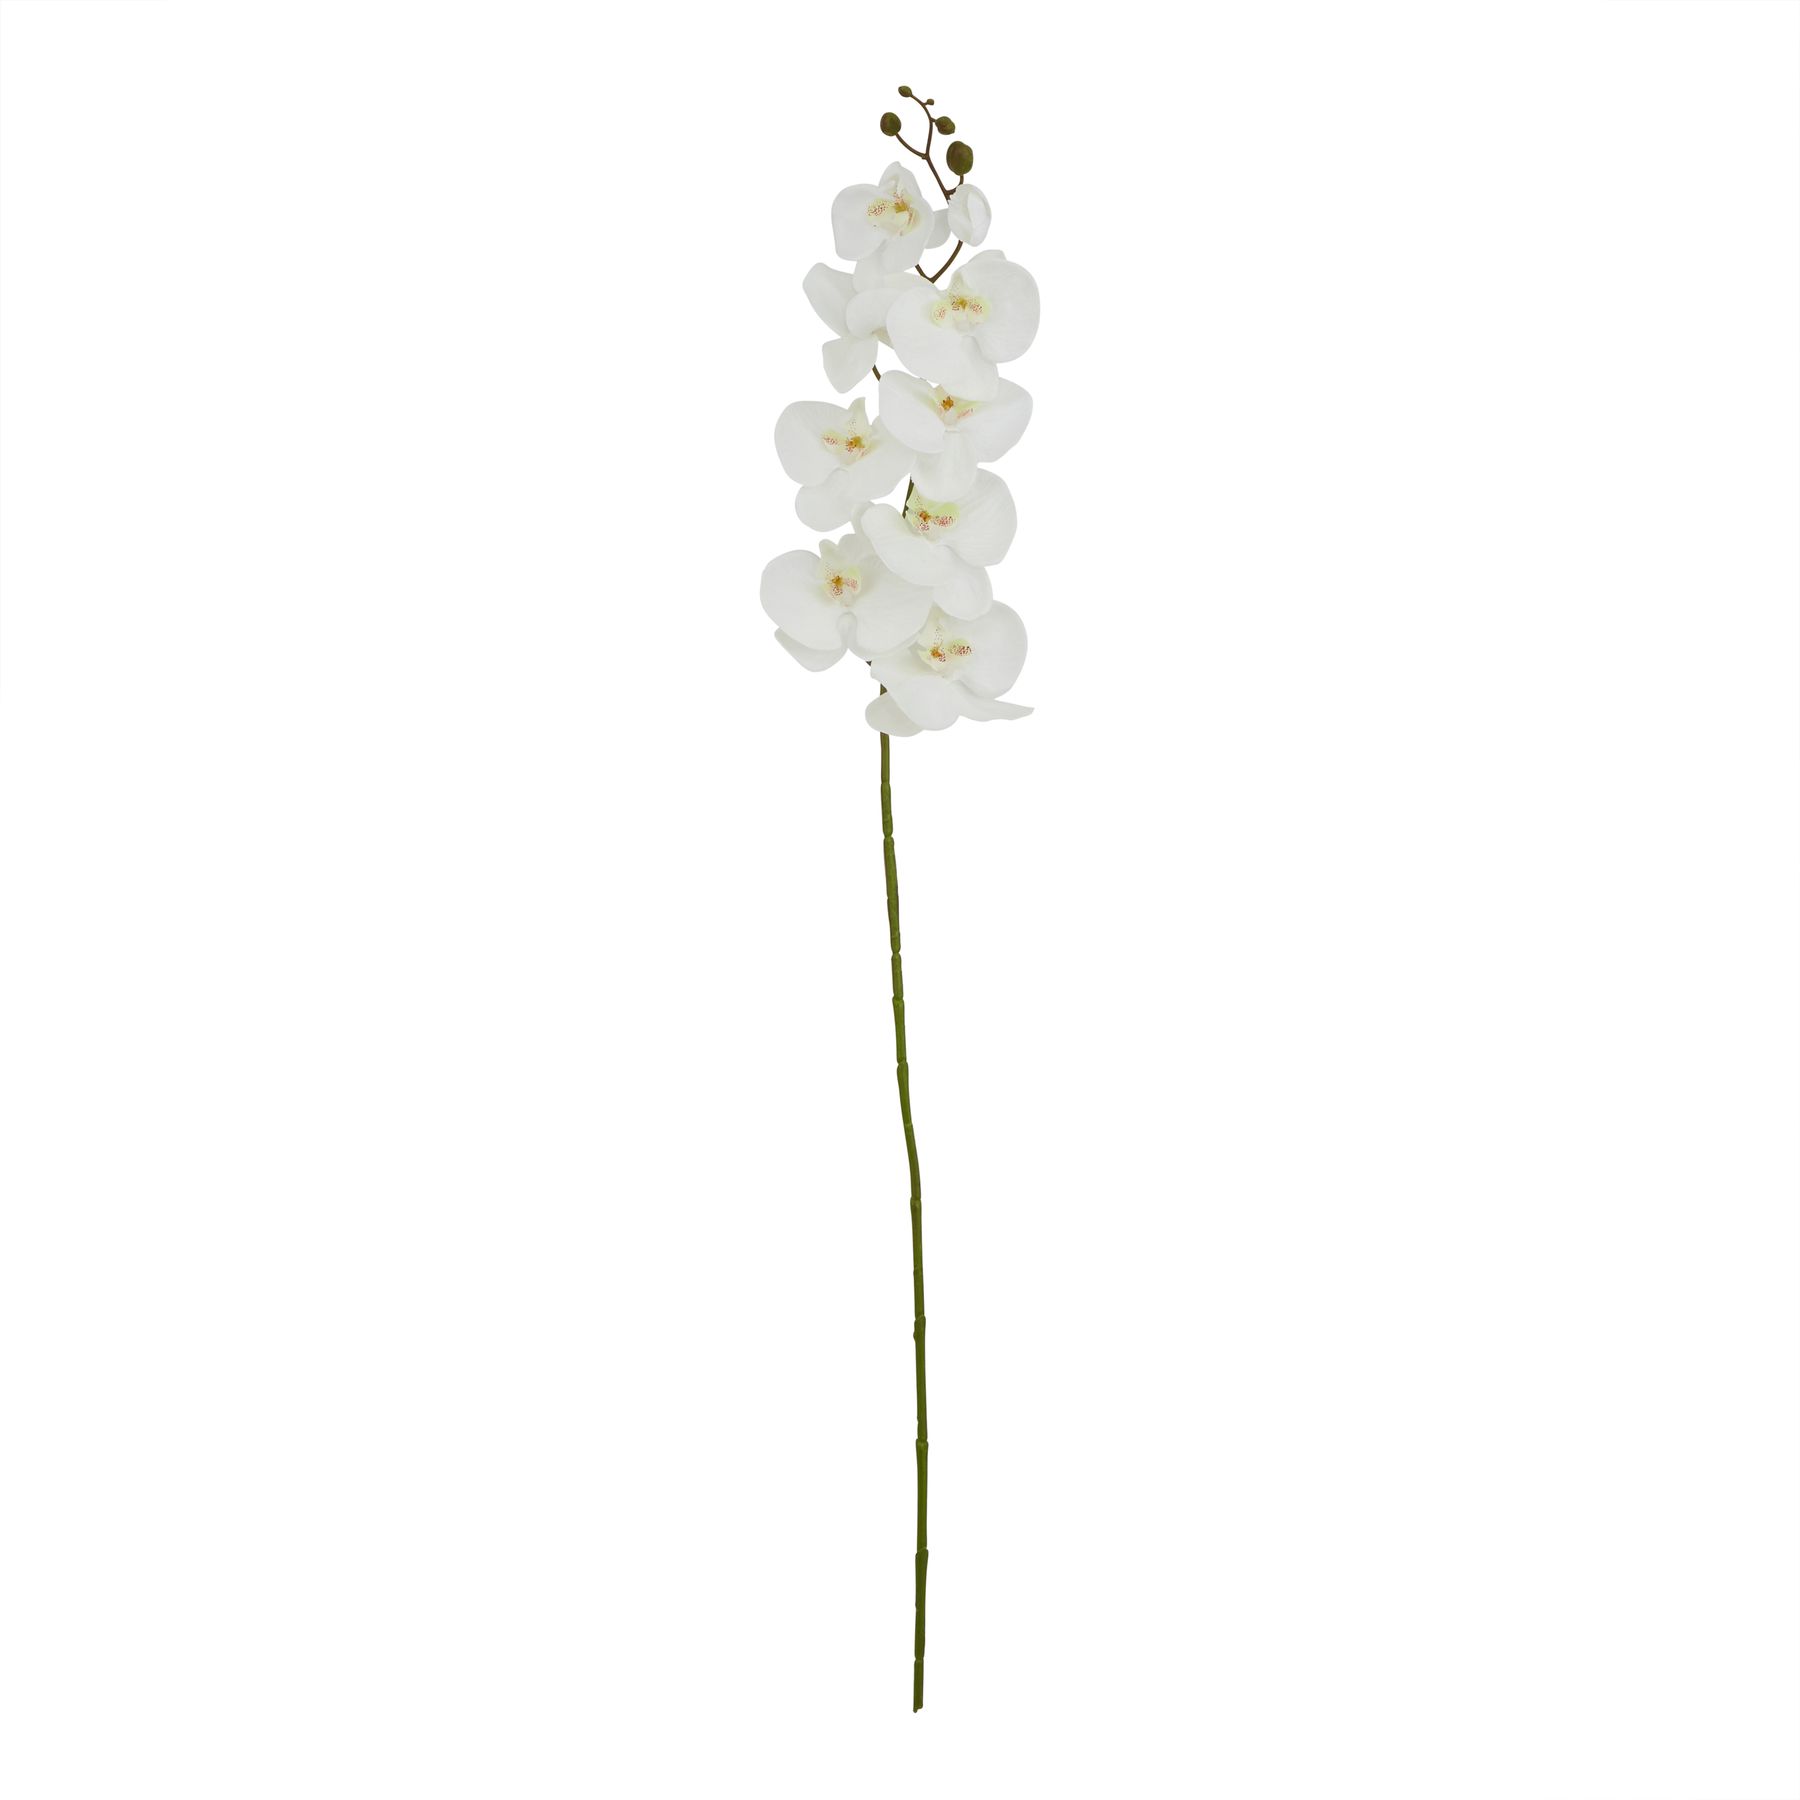 Tall White Butterfly Orchid Stem - Image 1